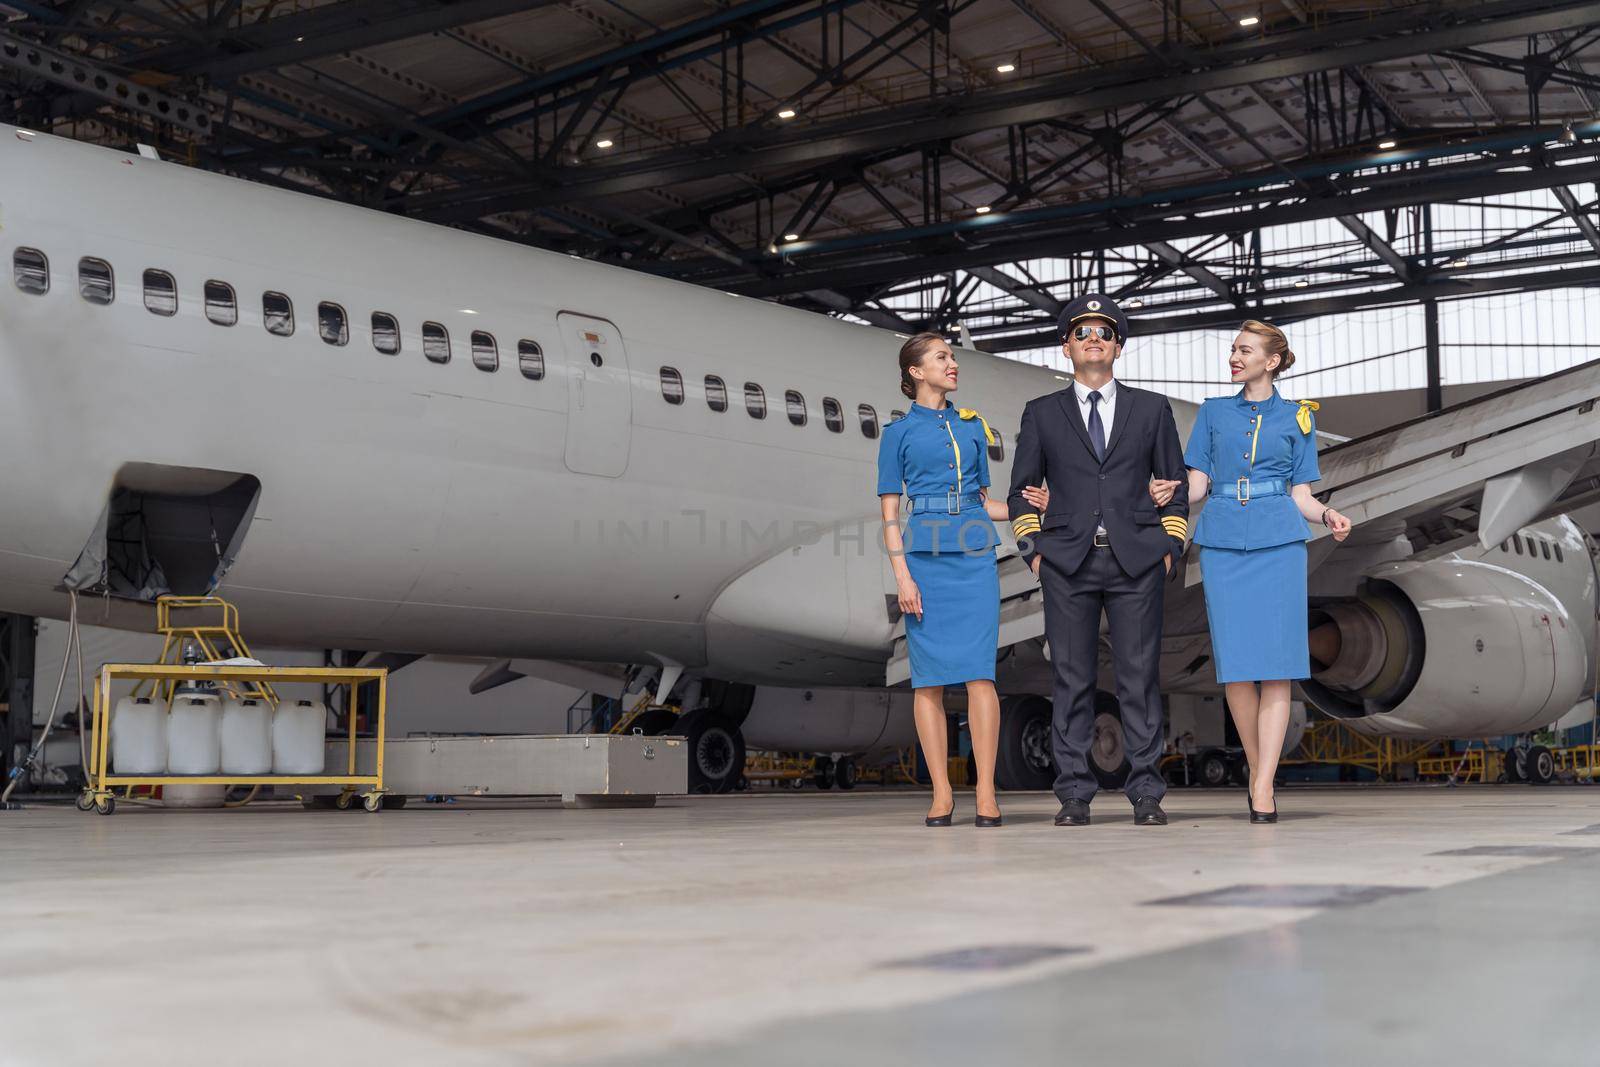 Happy pilot with two air stewardesses walking near airplane in hangar